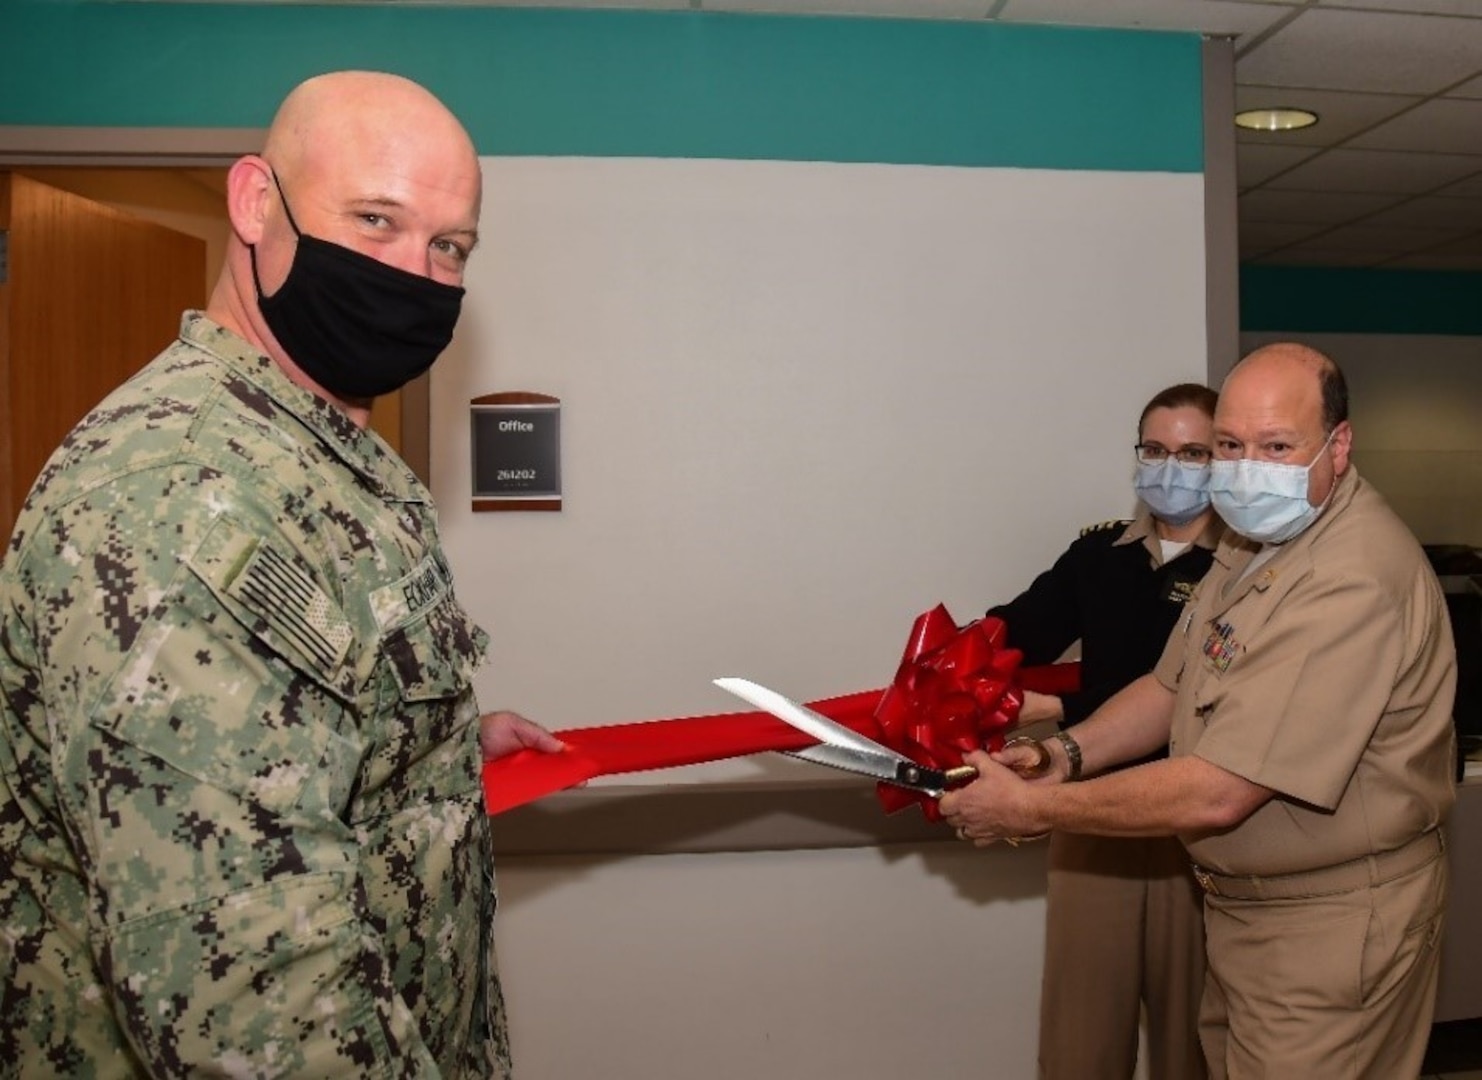 Naval Medical Center Portsmouth (NMCP) held a ribbon cutting ceremony to celebrate the opening of their new Traumatic Brain Injury (TBI) services department clinic, March 19.